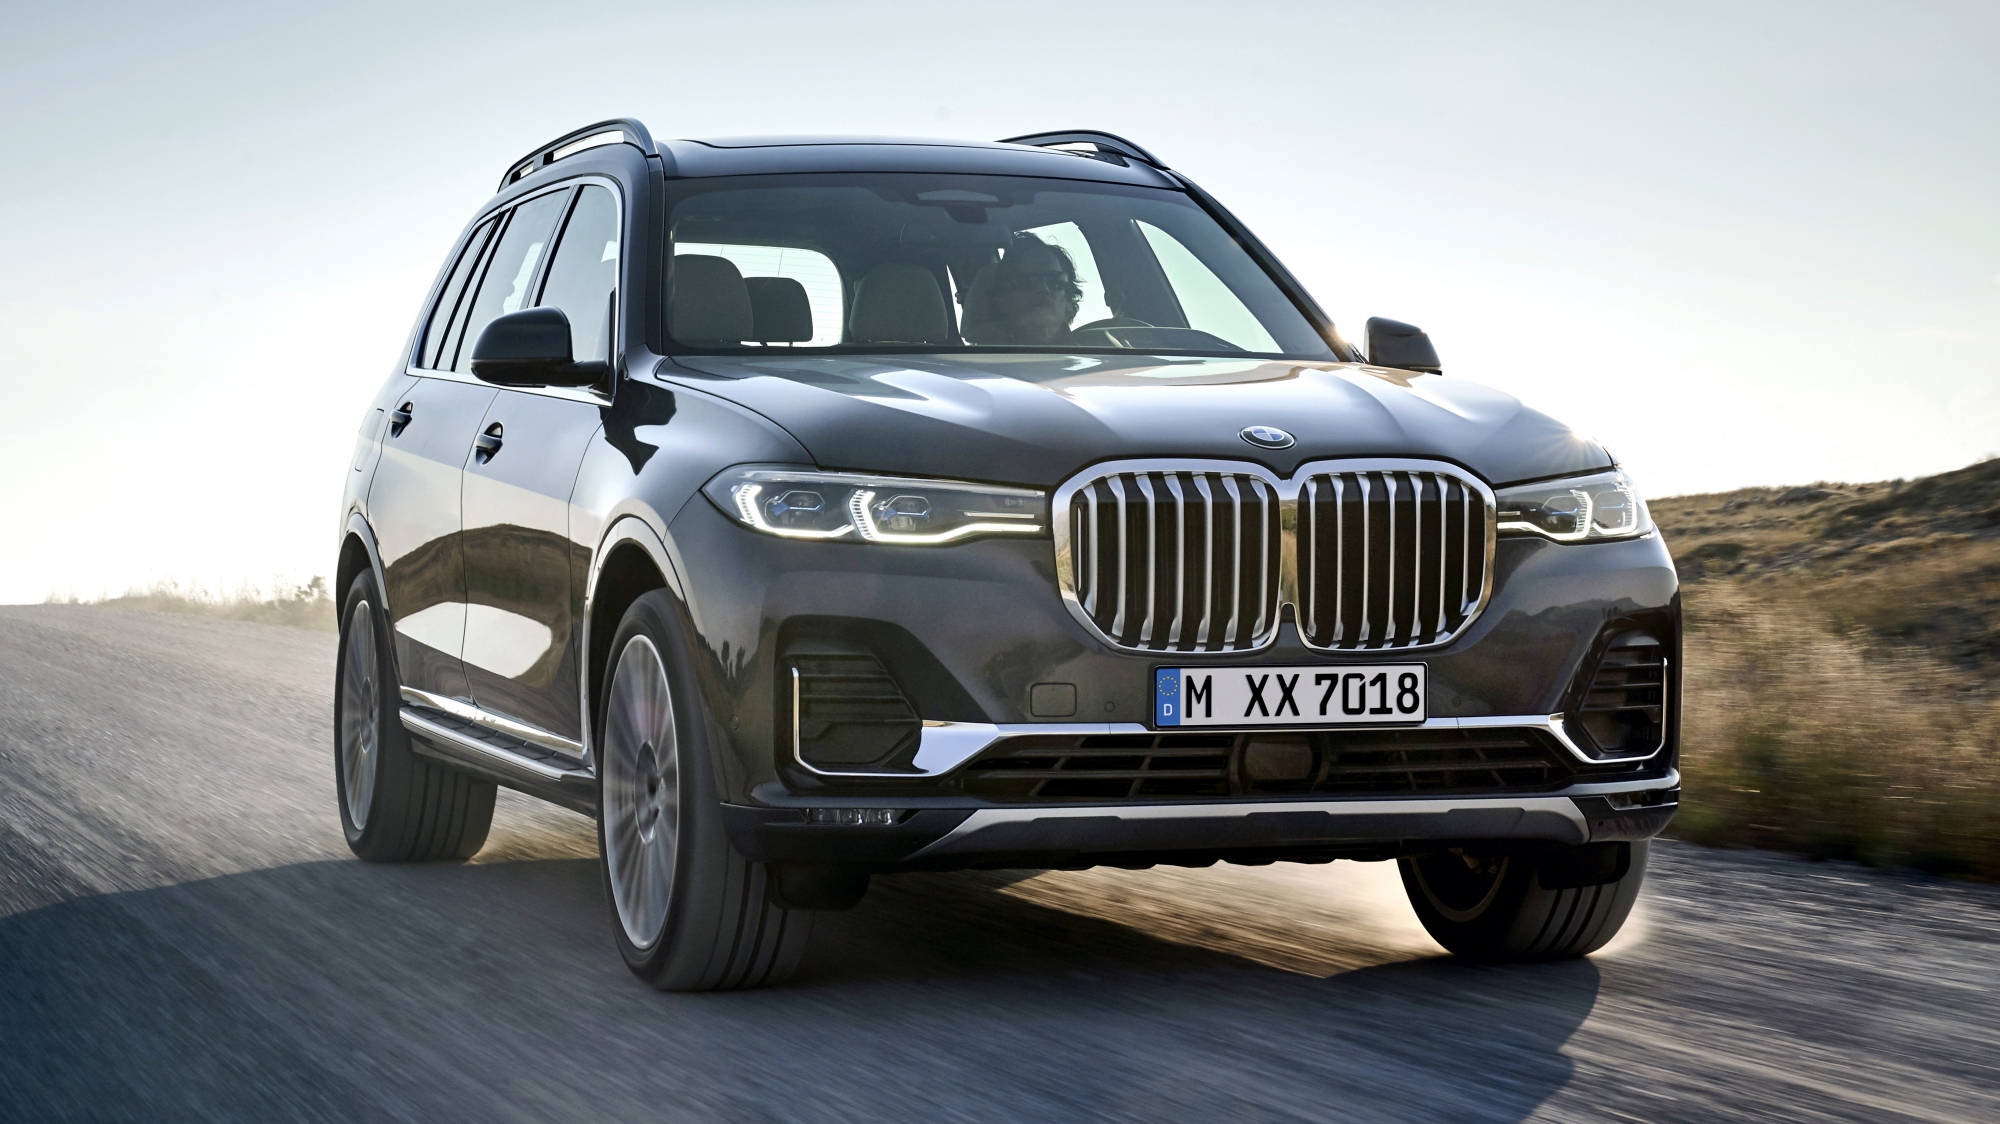 News - BMW X7 Gets Australian Specs And Prices